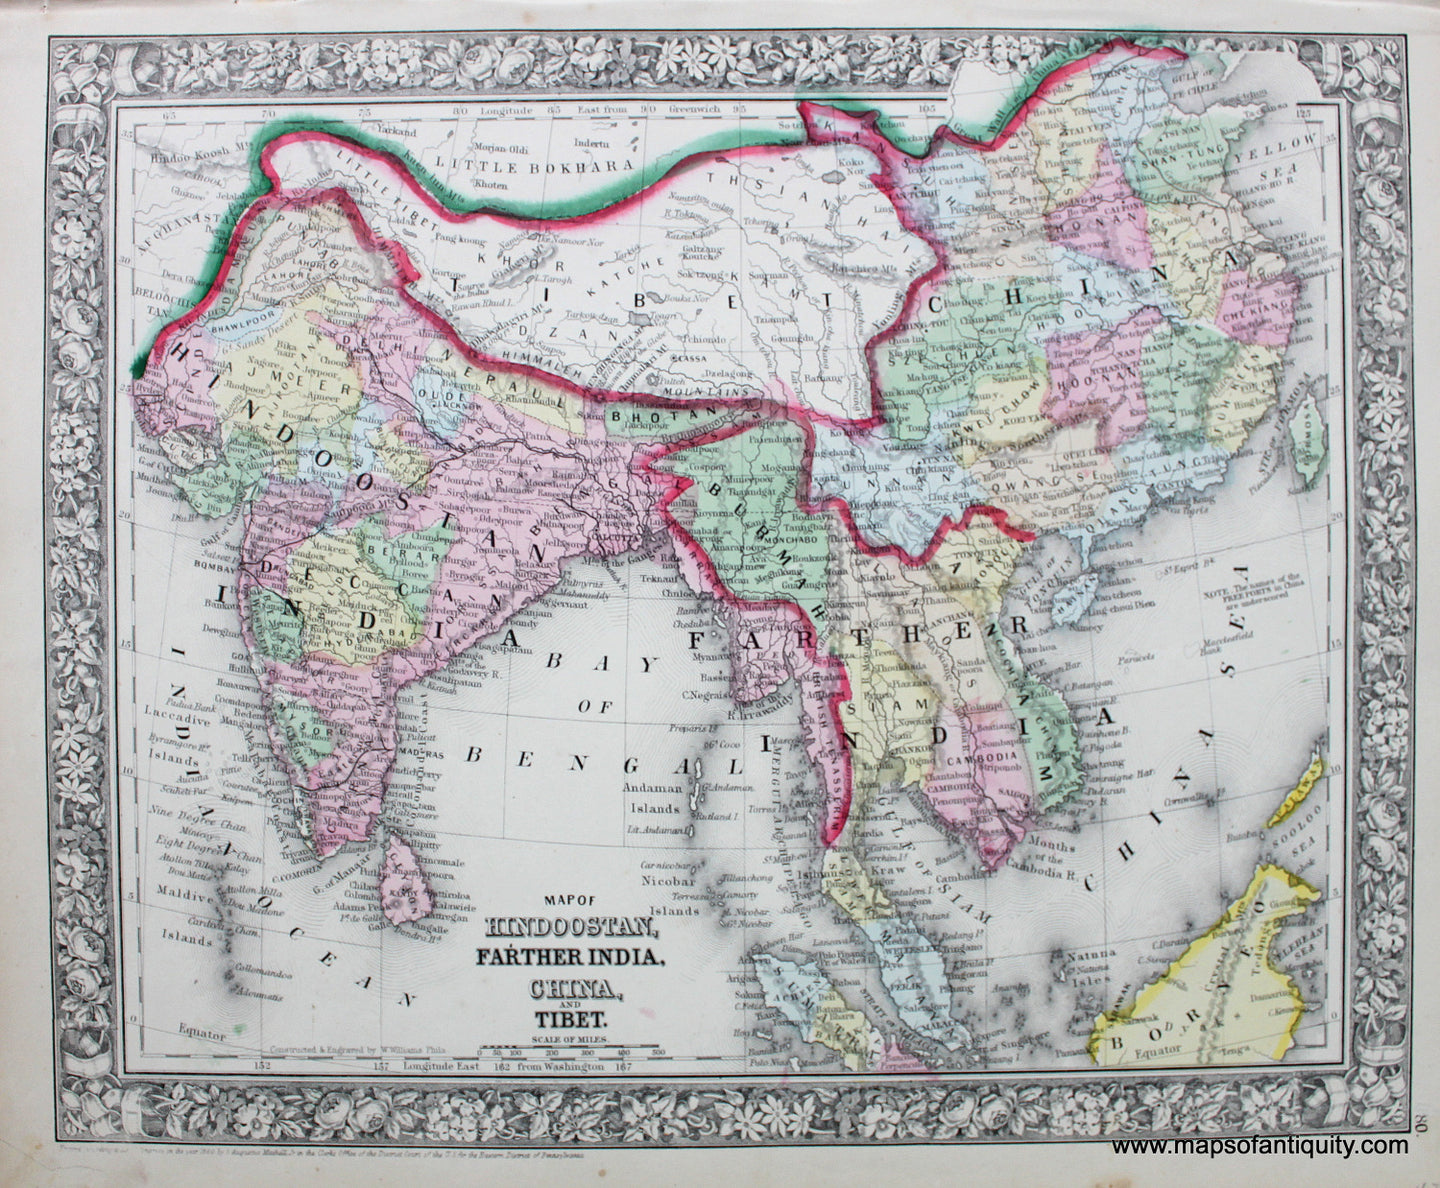 Antique-Hand-Colored-Map-Map-of-Hindoostan-Farther-India-China-and-Tibet.--Asia-India-1864-Mitchell-Maps-Of-Antiquity